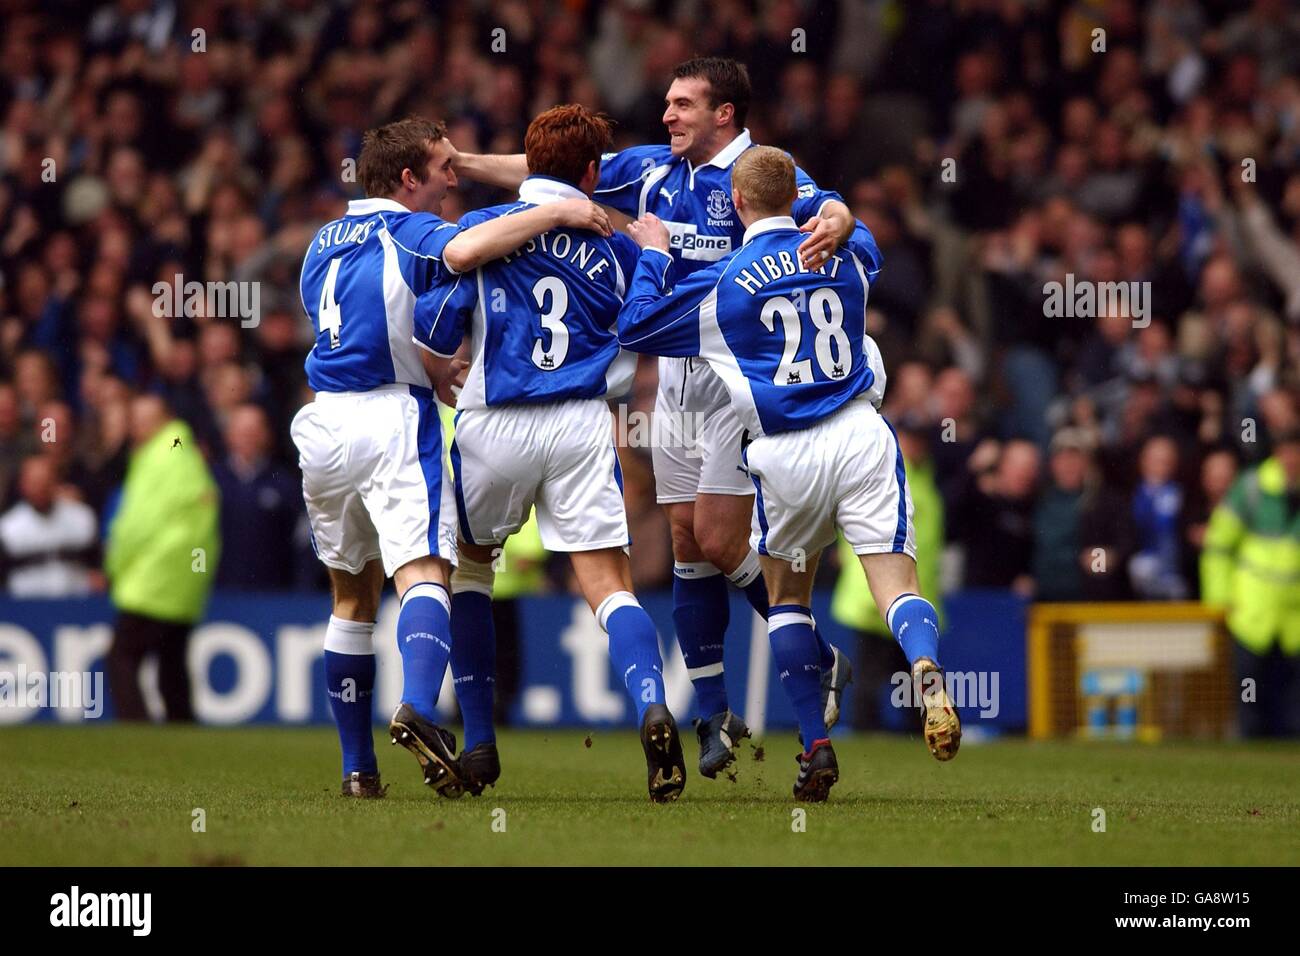 Soccer - FA Barclaycard Premiership - Everton v Fulham. Everton's David Unsworth celebrates after scoring after 27 seconds with his team mates Stock Photo